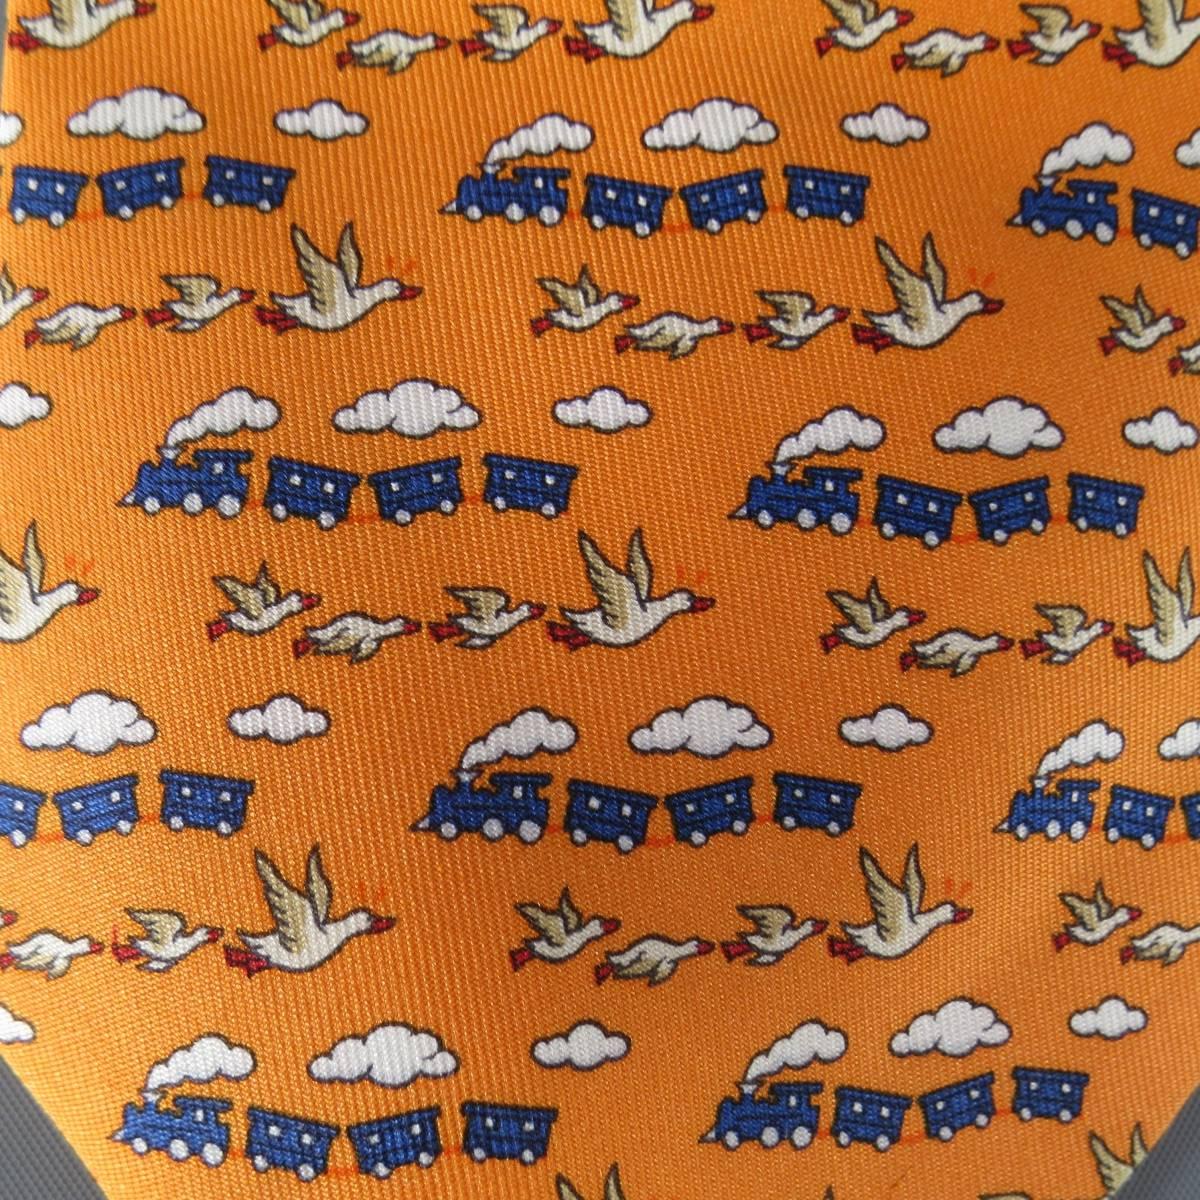 HERMES Tie consists of 100% silk material in a vibrant orange color tone. Designed in a slim style, graphic print throughout body. Detailed with birds, clouds and trains in beige, blue and white tones. Made in France.
 
Good Pre-Owned